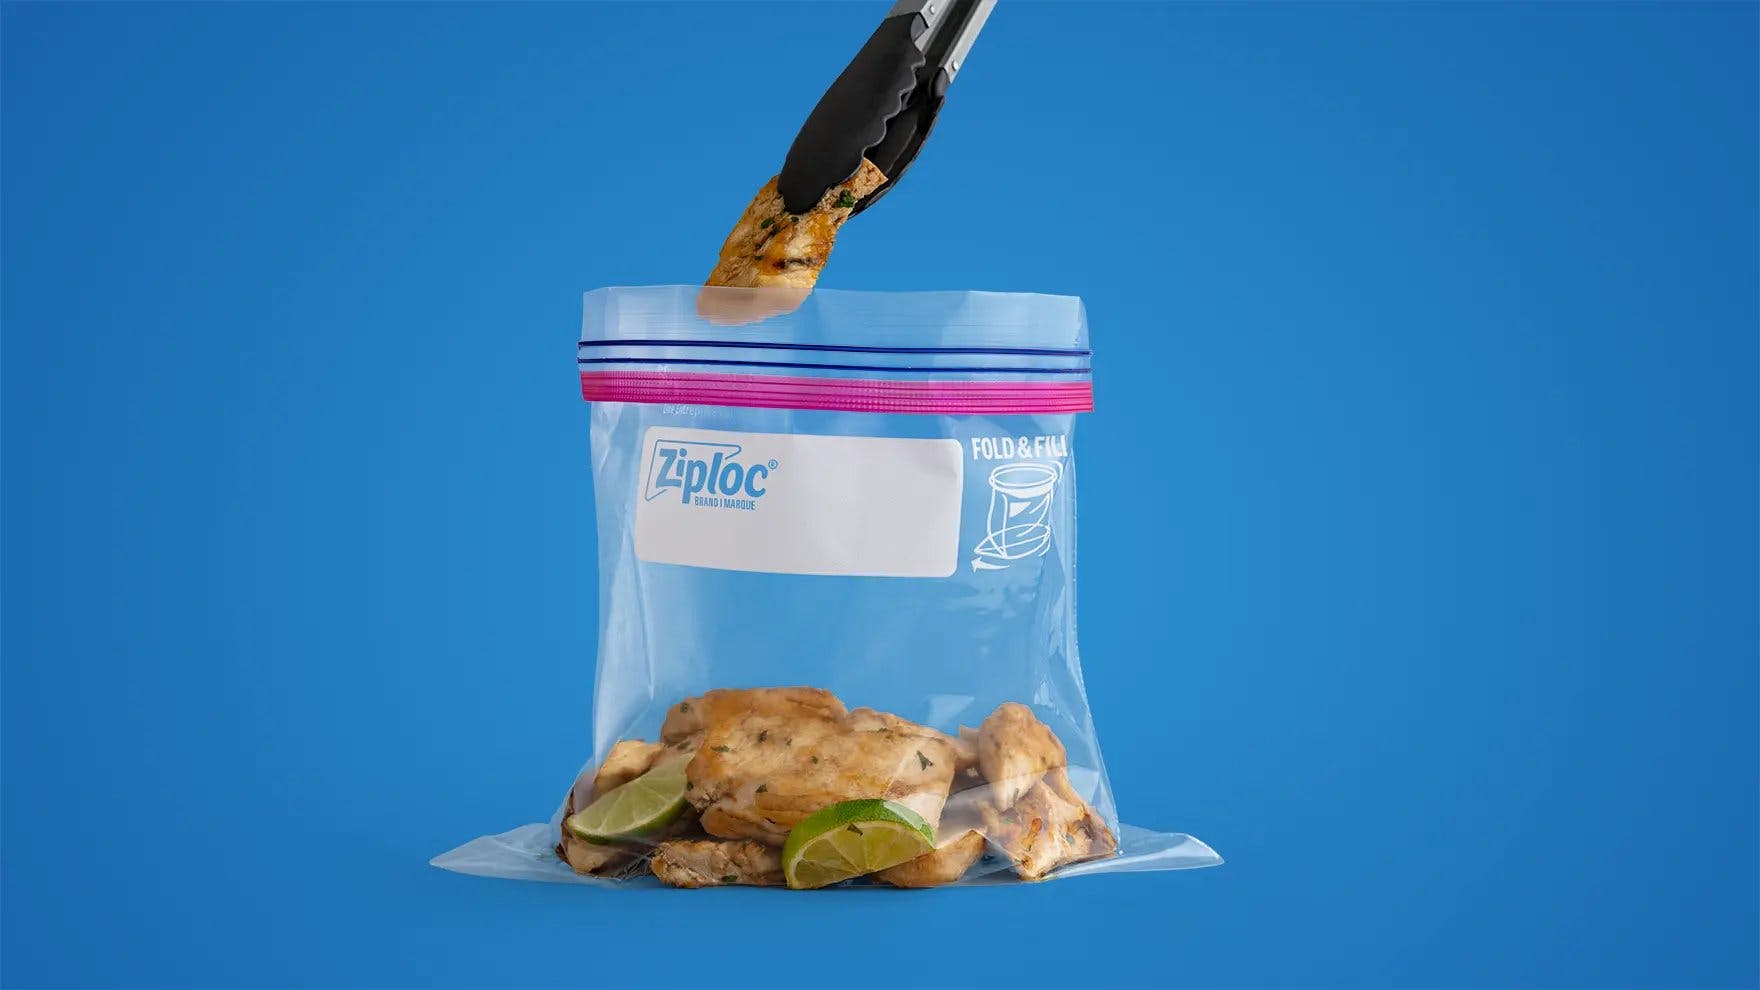 Ziploc large one gallon storage bag filled with chicken and lemon.